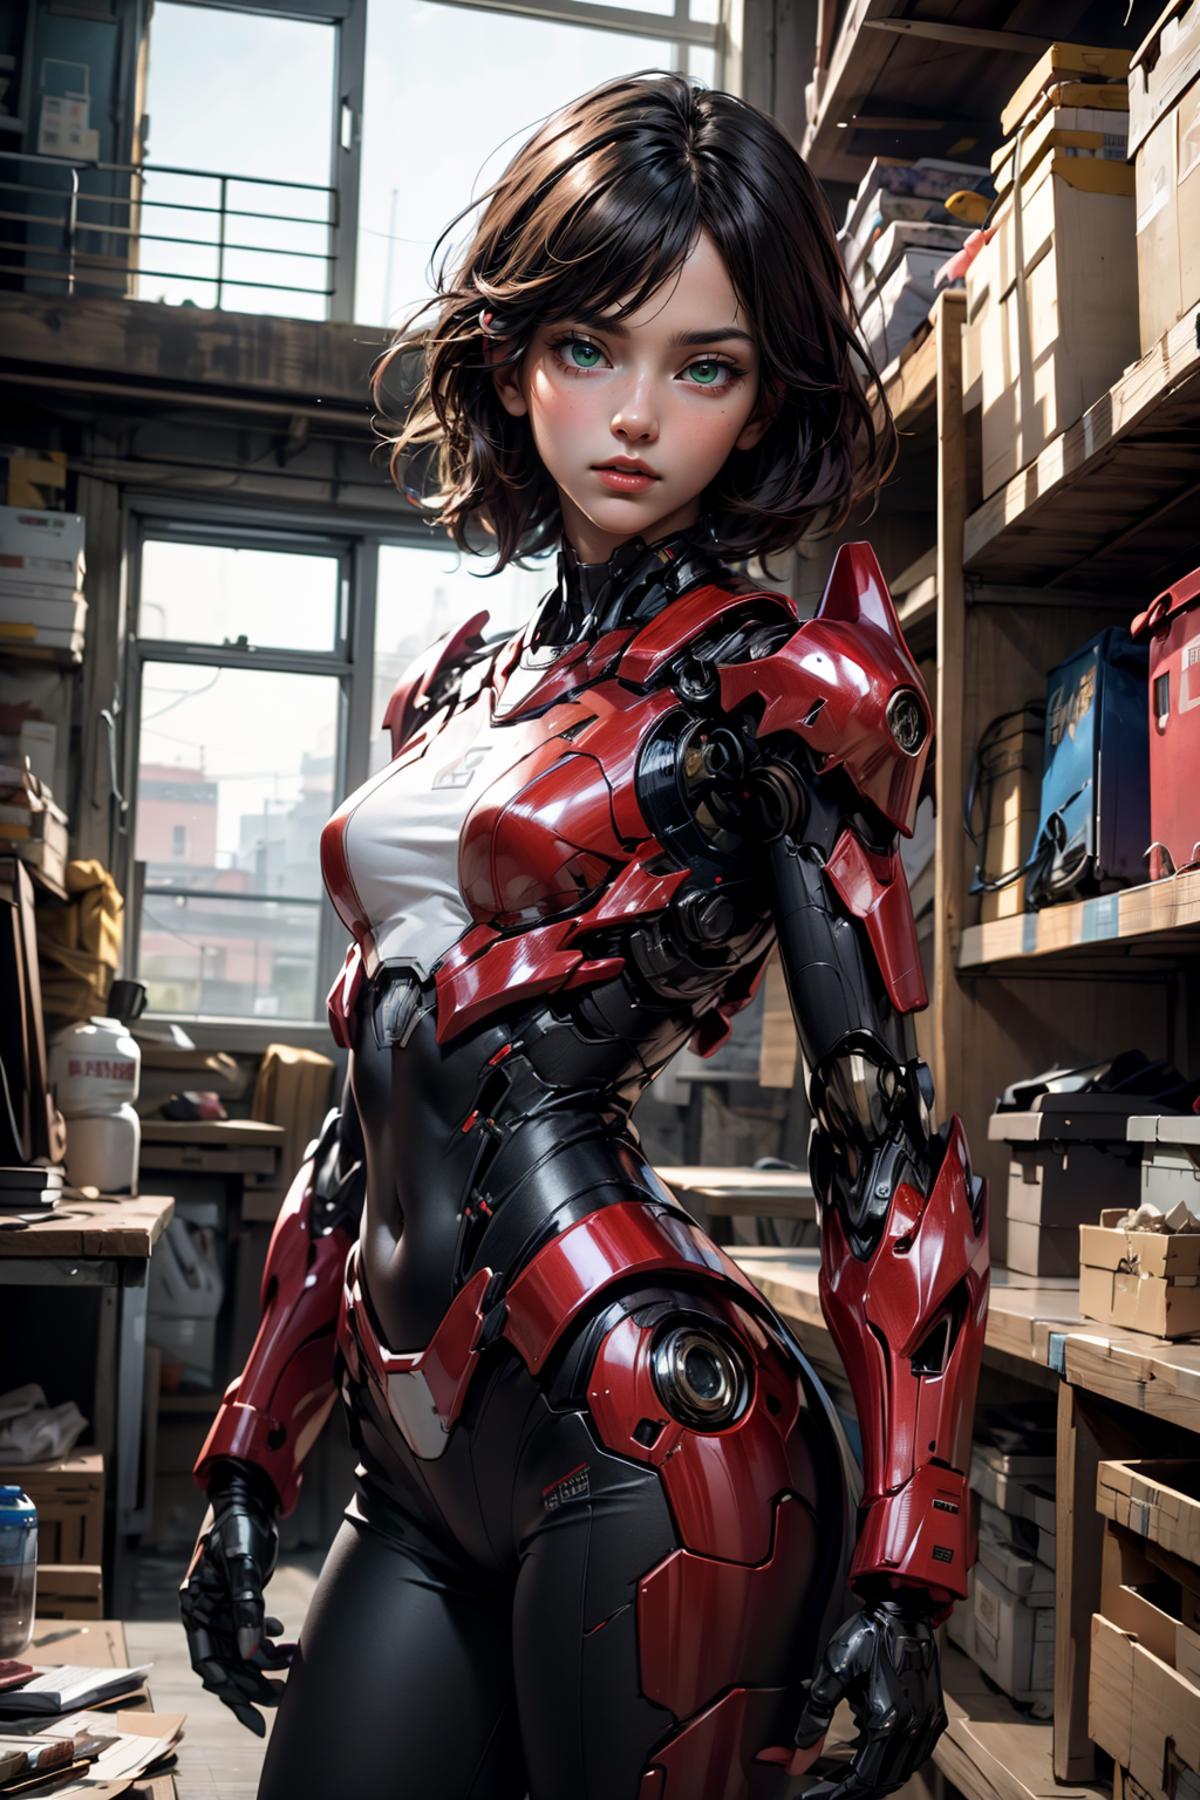 A computer-generated image of a woman in a red and white armored suit.